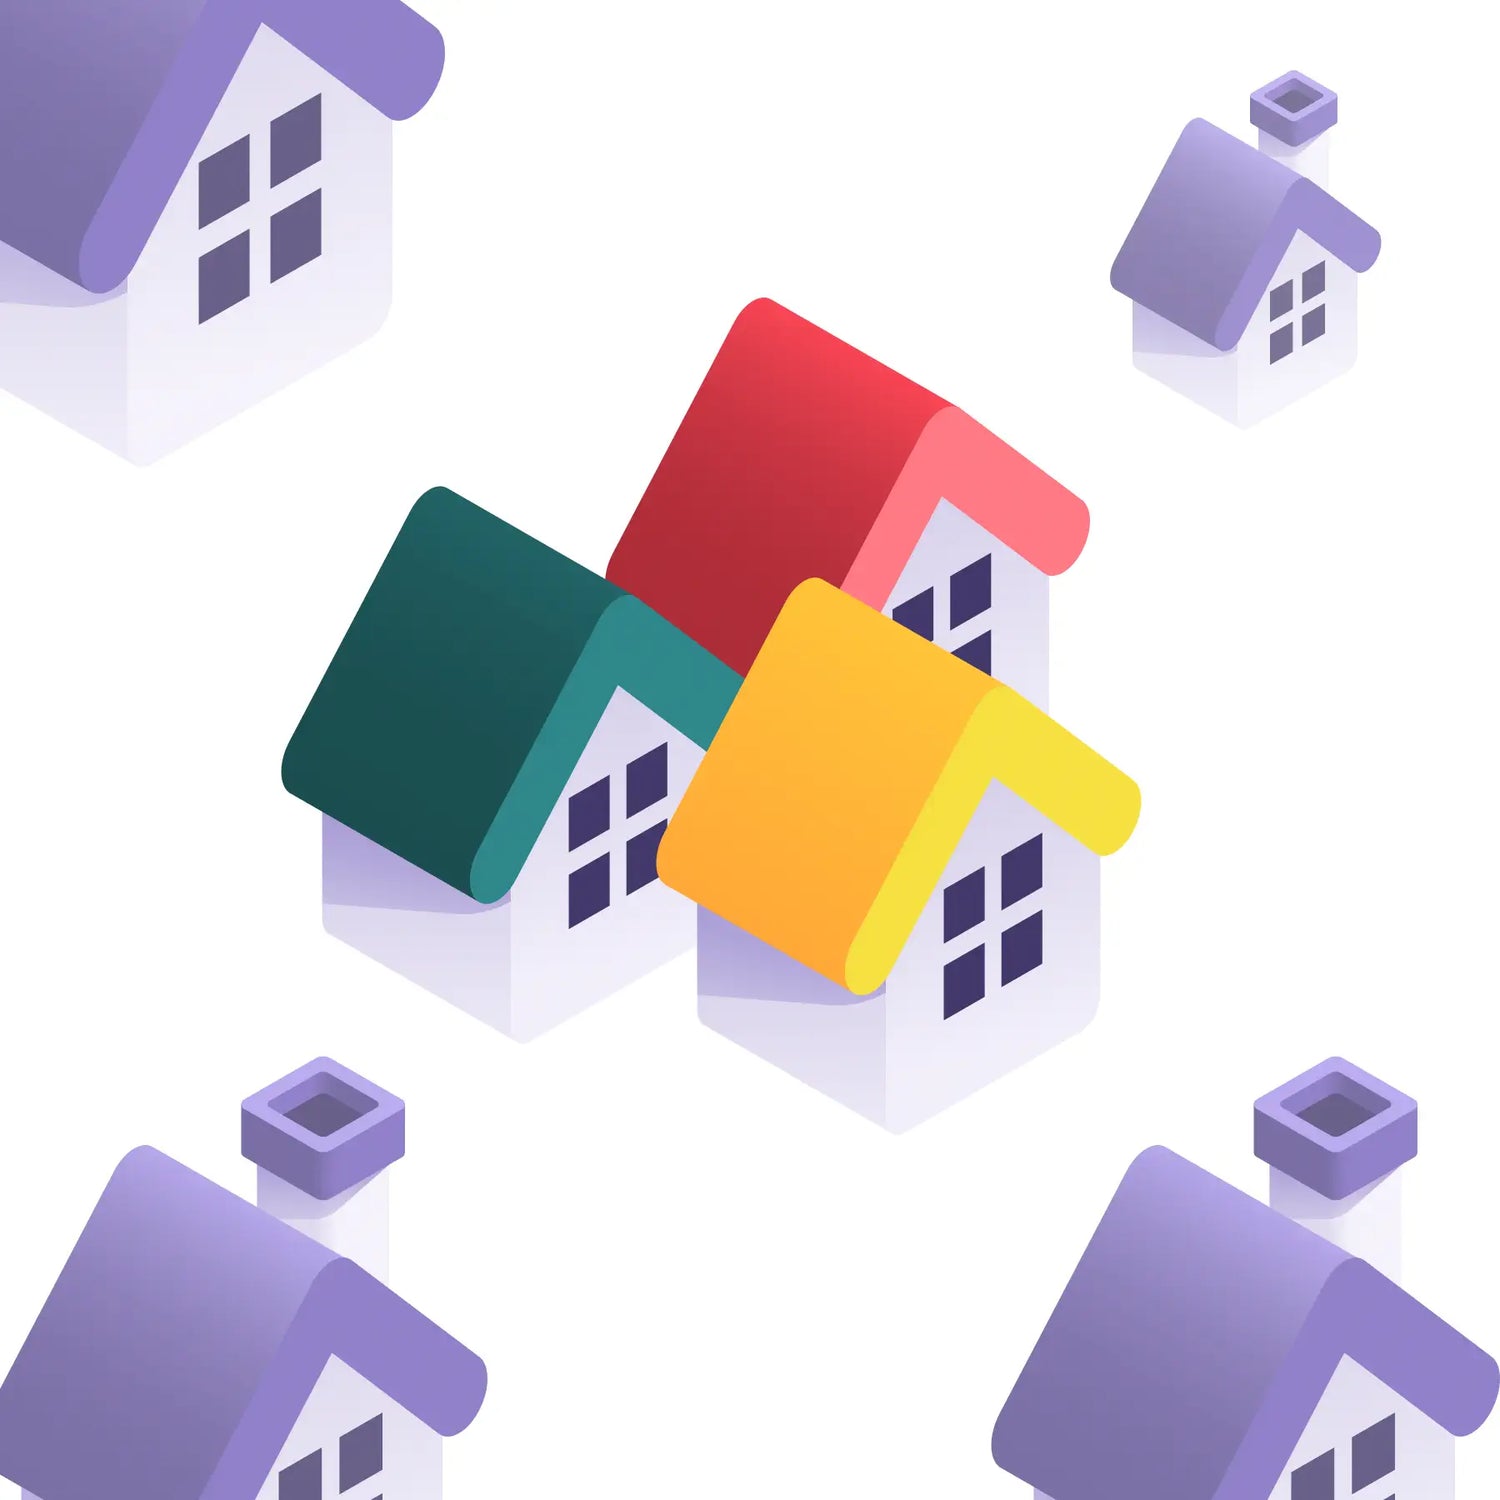 A white image with 7 house icons. All the houses have white wall and black windows. 4 houses have purple roofs, 1 has a yellow roof, 1 has a red roof and 1 has a dark green roof